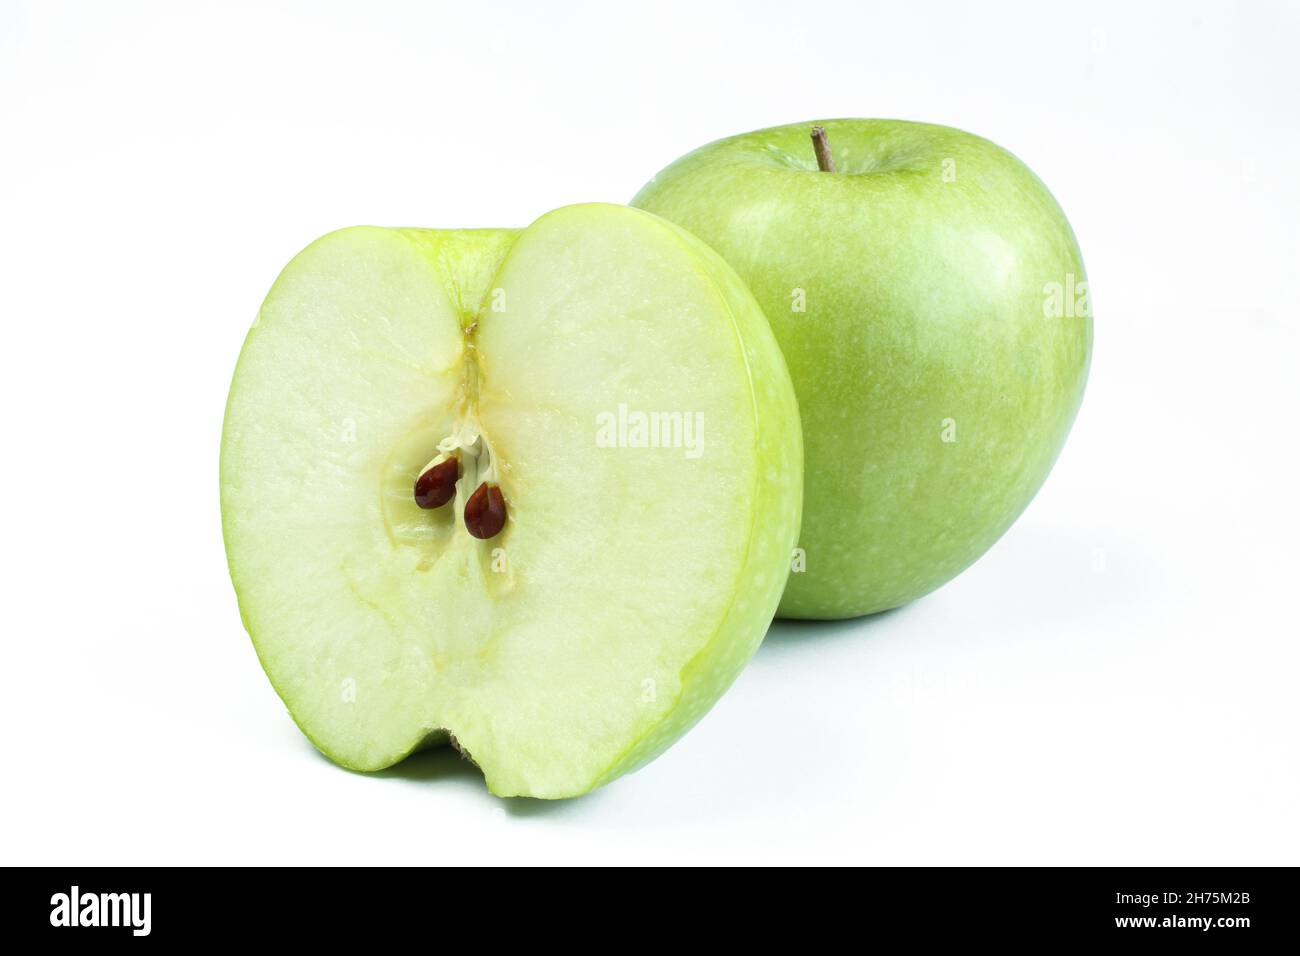 One whole and a half apple isolated on white background. Green fruit sliced Stock Photo